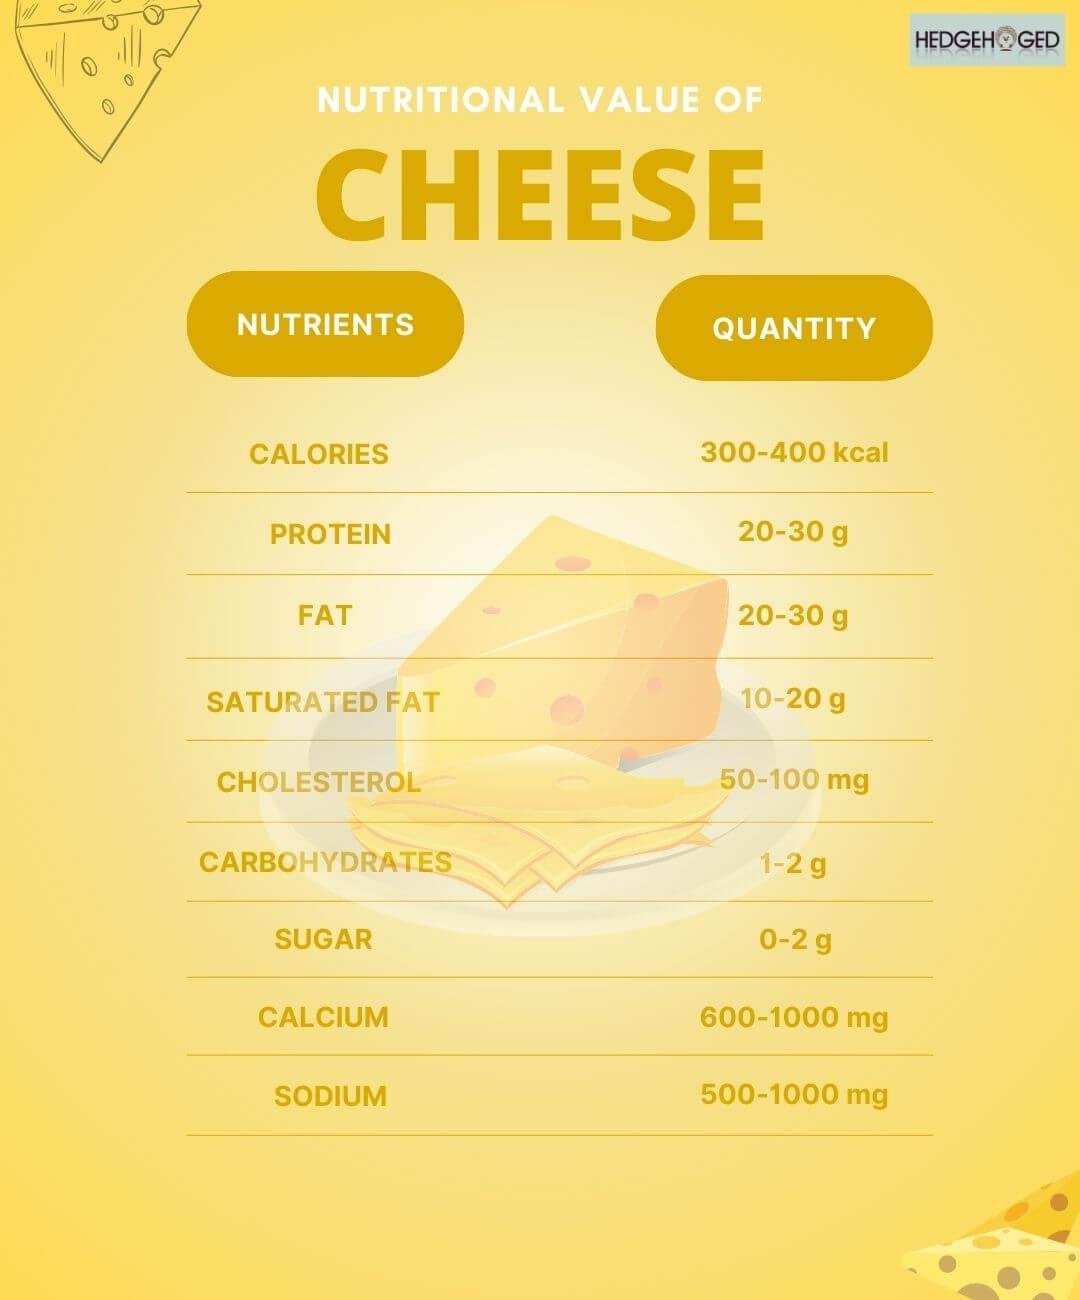 Nutritional Value of Cheese